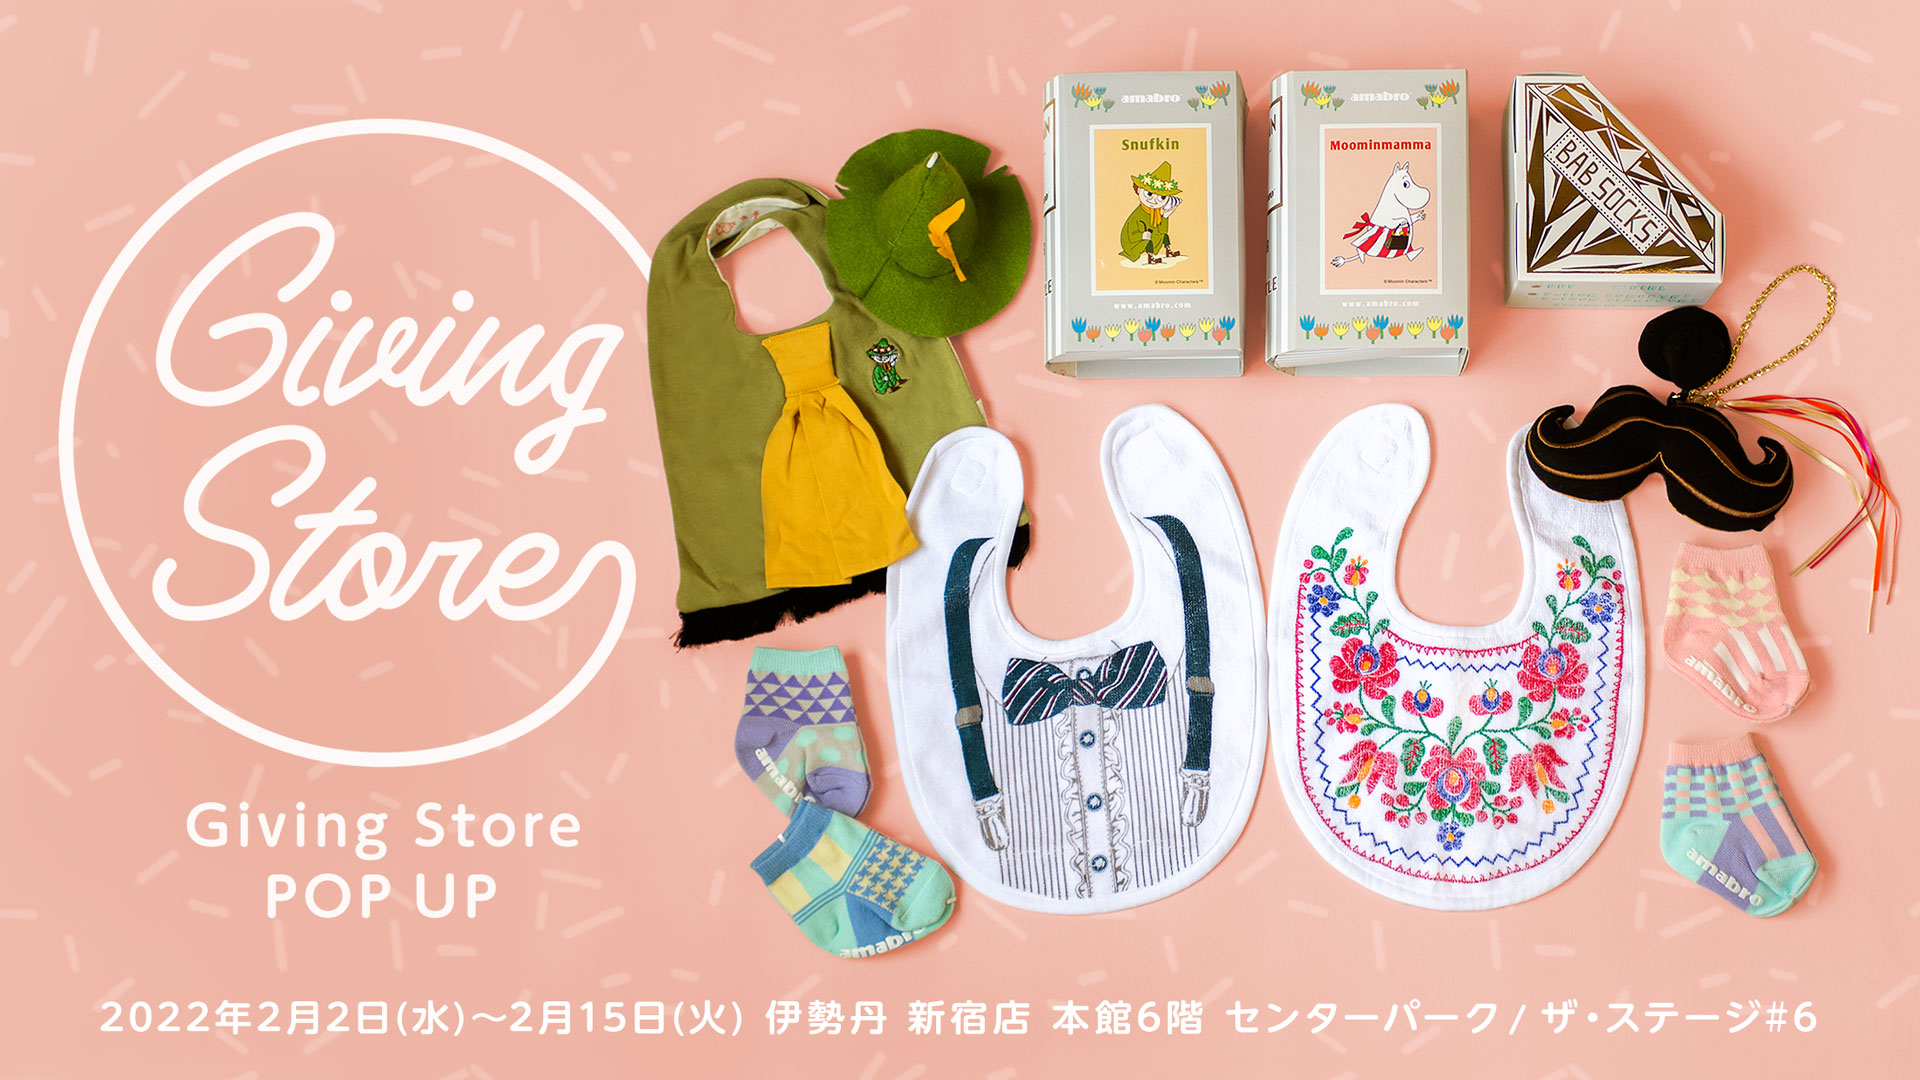 Giving Store POP UP ＠伊勢丹新宿店 本館6階 センターパーク/ザ・ステージ#6